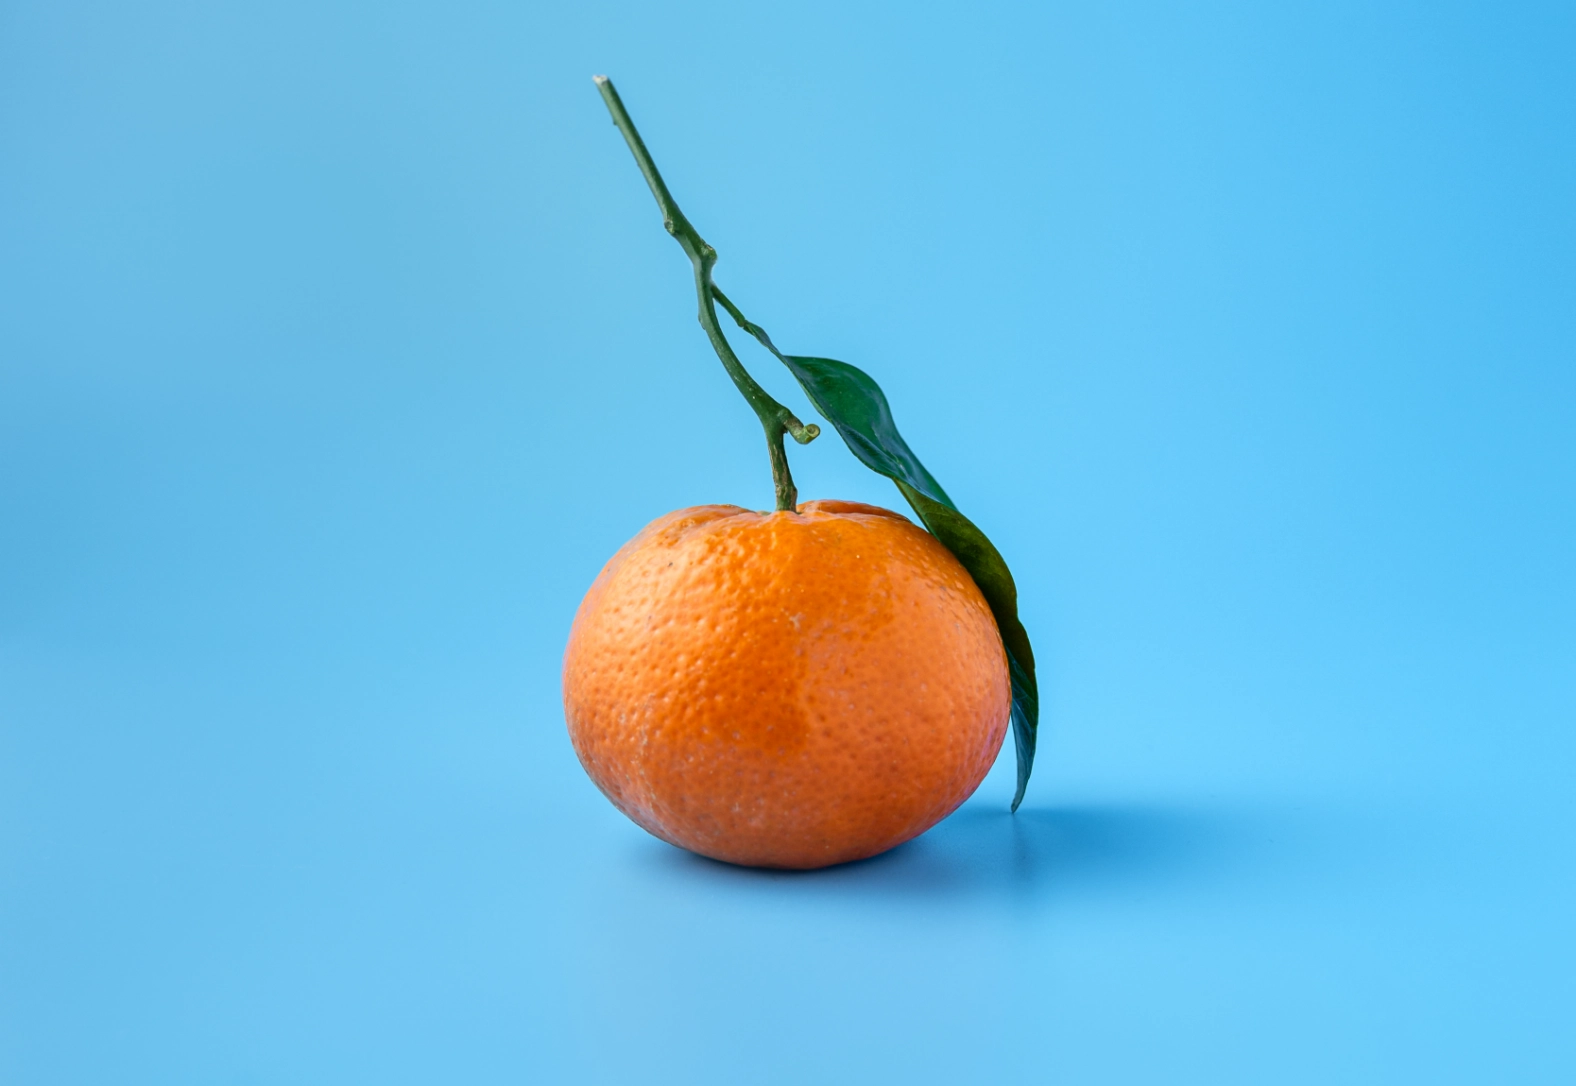 an orange with a green stem